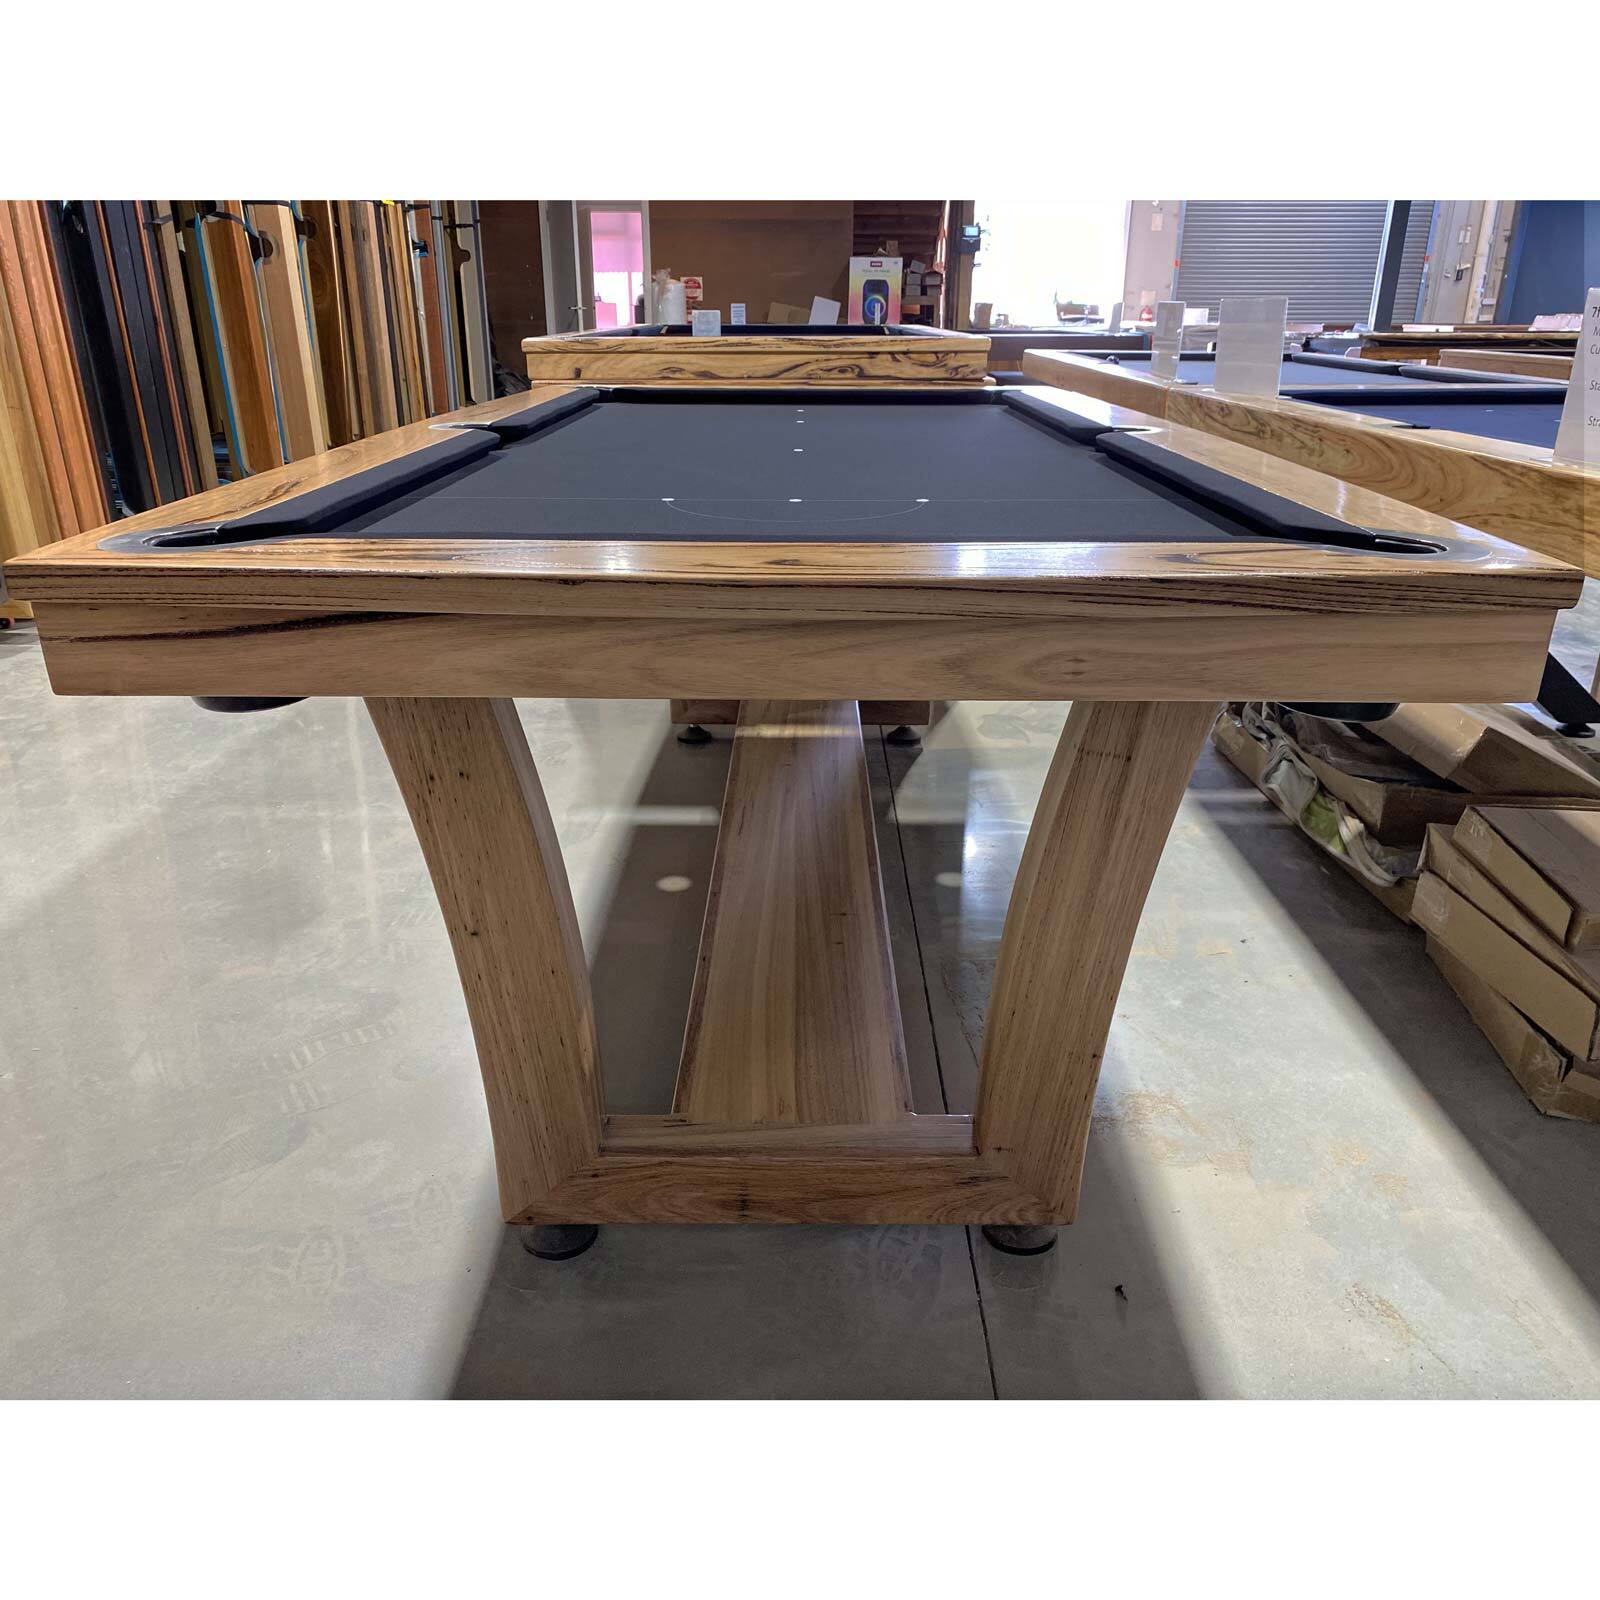 PRE-MADE 7 Foot Slate Homestead Pool Table with Messmate timber